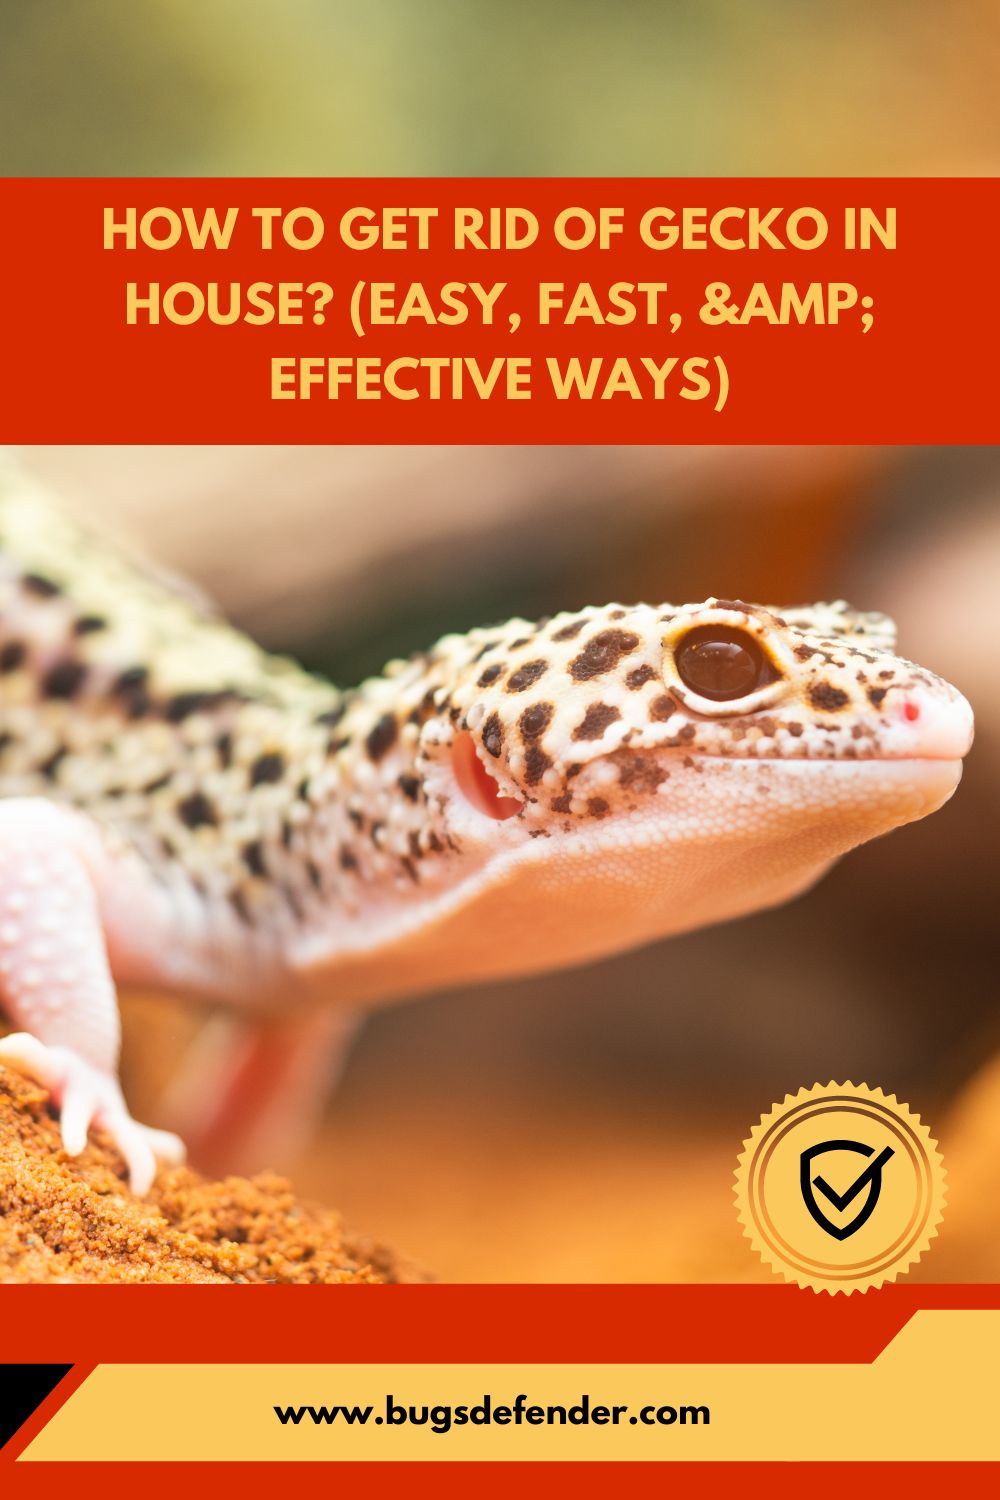 How to Get Rid of Gecko in House (Easy, Fast, & Effective Ways) pin1